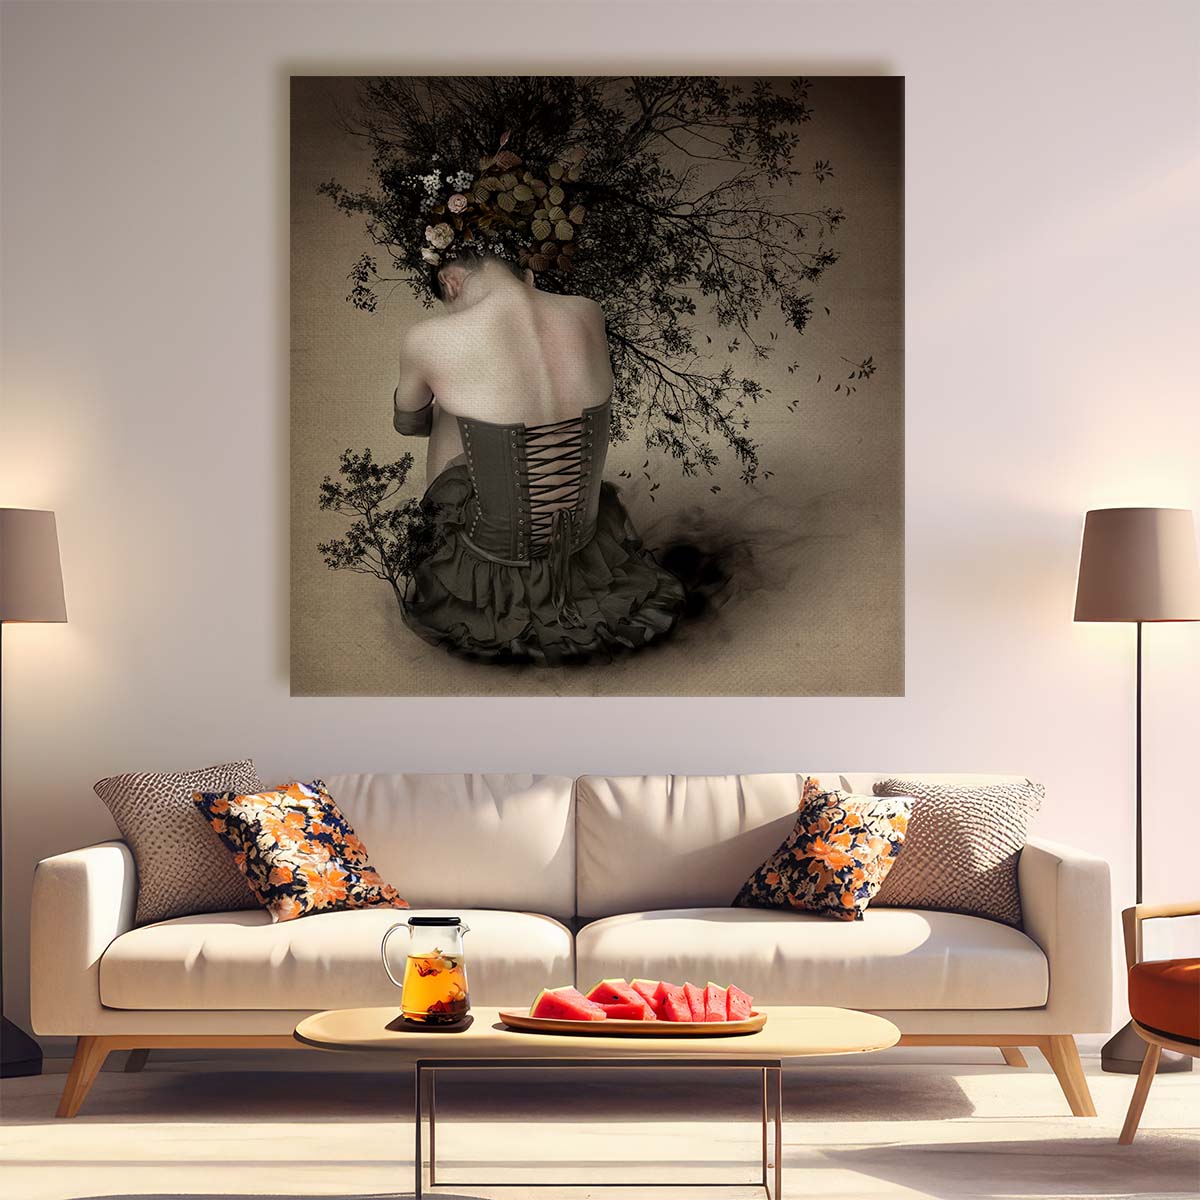 Enigmatic Woman in Blossom A Surreal Floral Fantasy Wall Art by Luxuriance Designs. Made in USA.